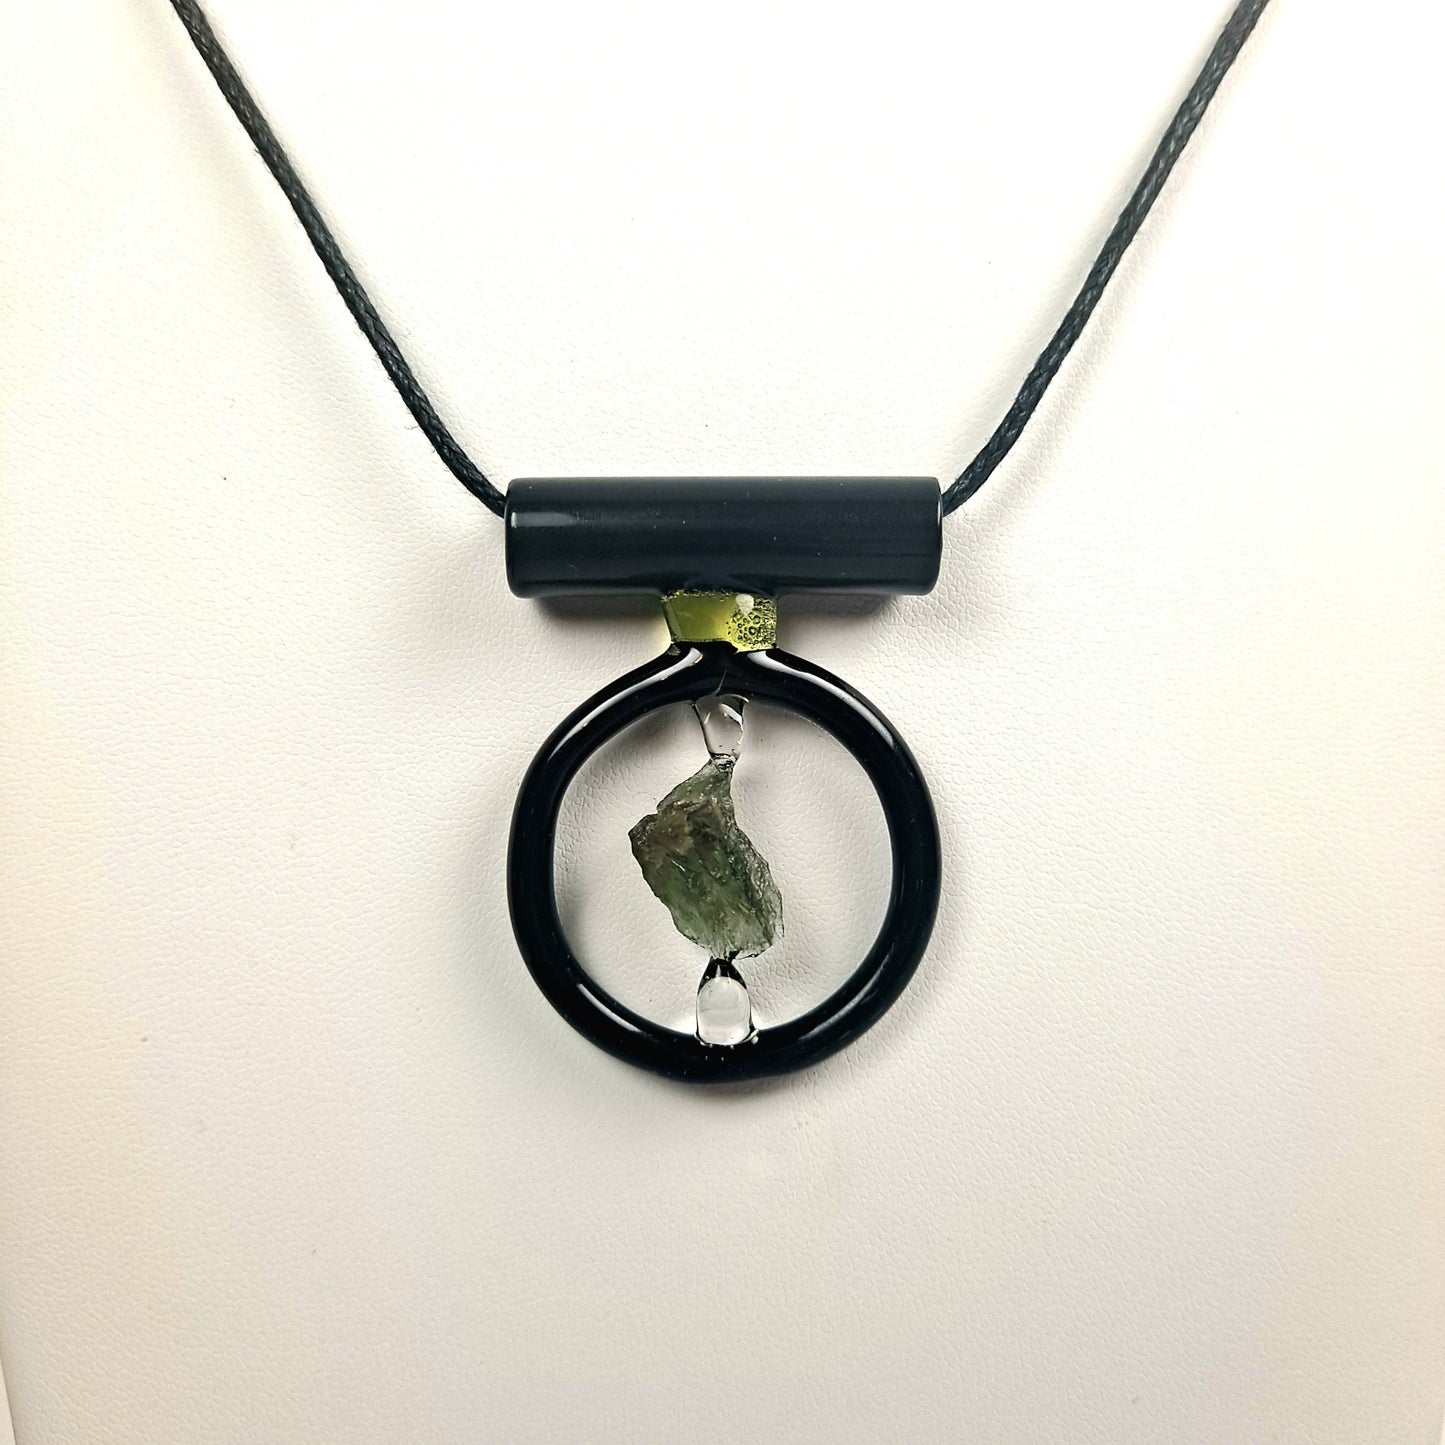 Limited Edition Moldavite and Glass Necklace Collection